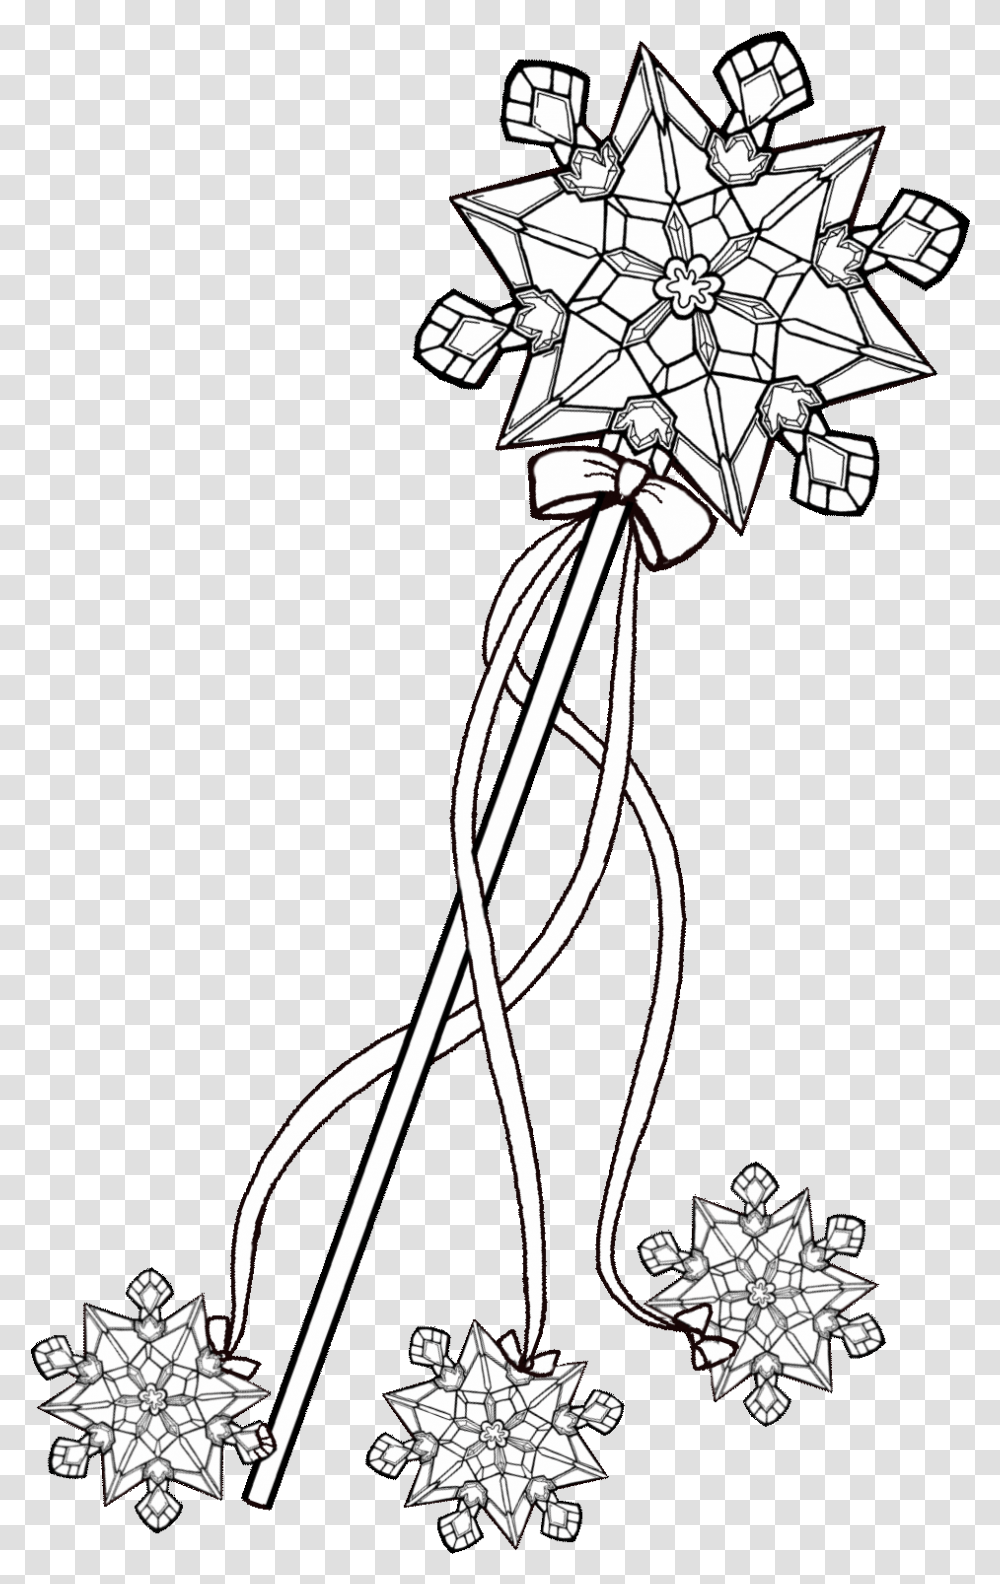 Fairy Wand Coloring Pages, Flower, Plant, Blossom, Floral Design Transparent Png